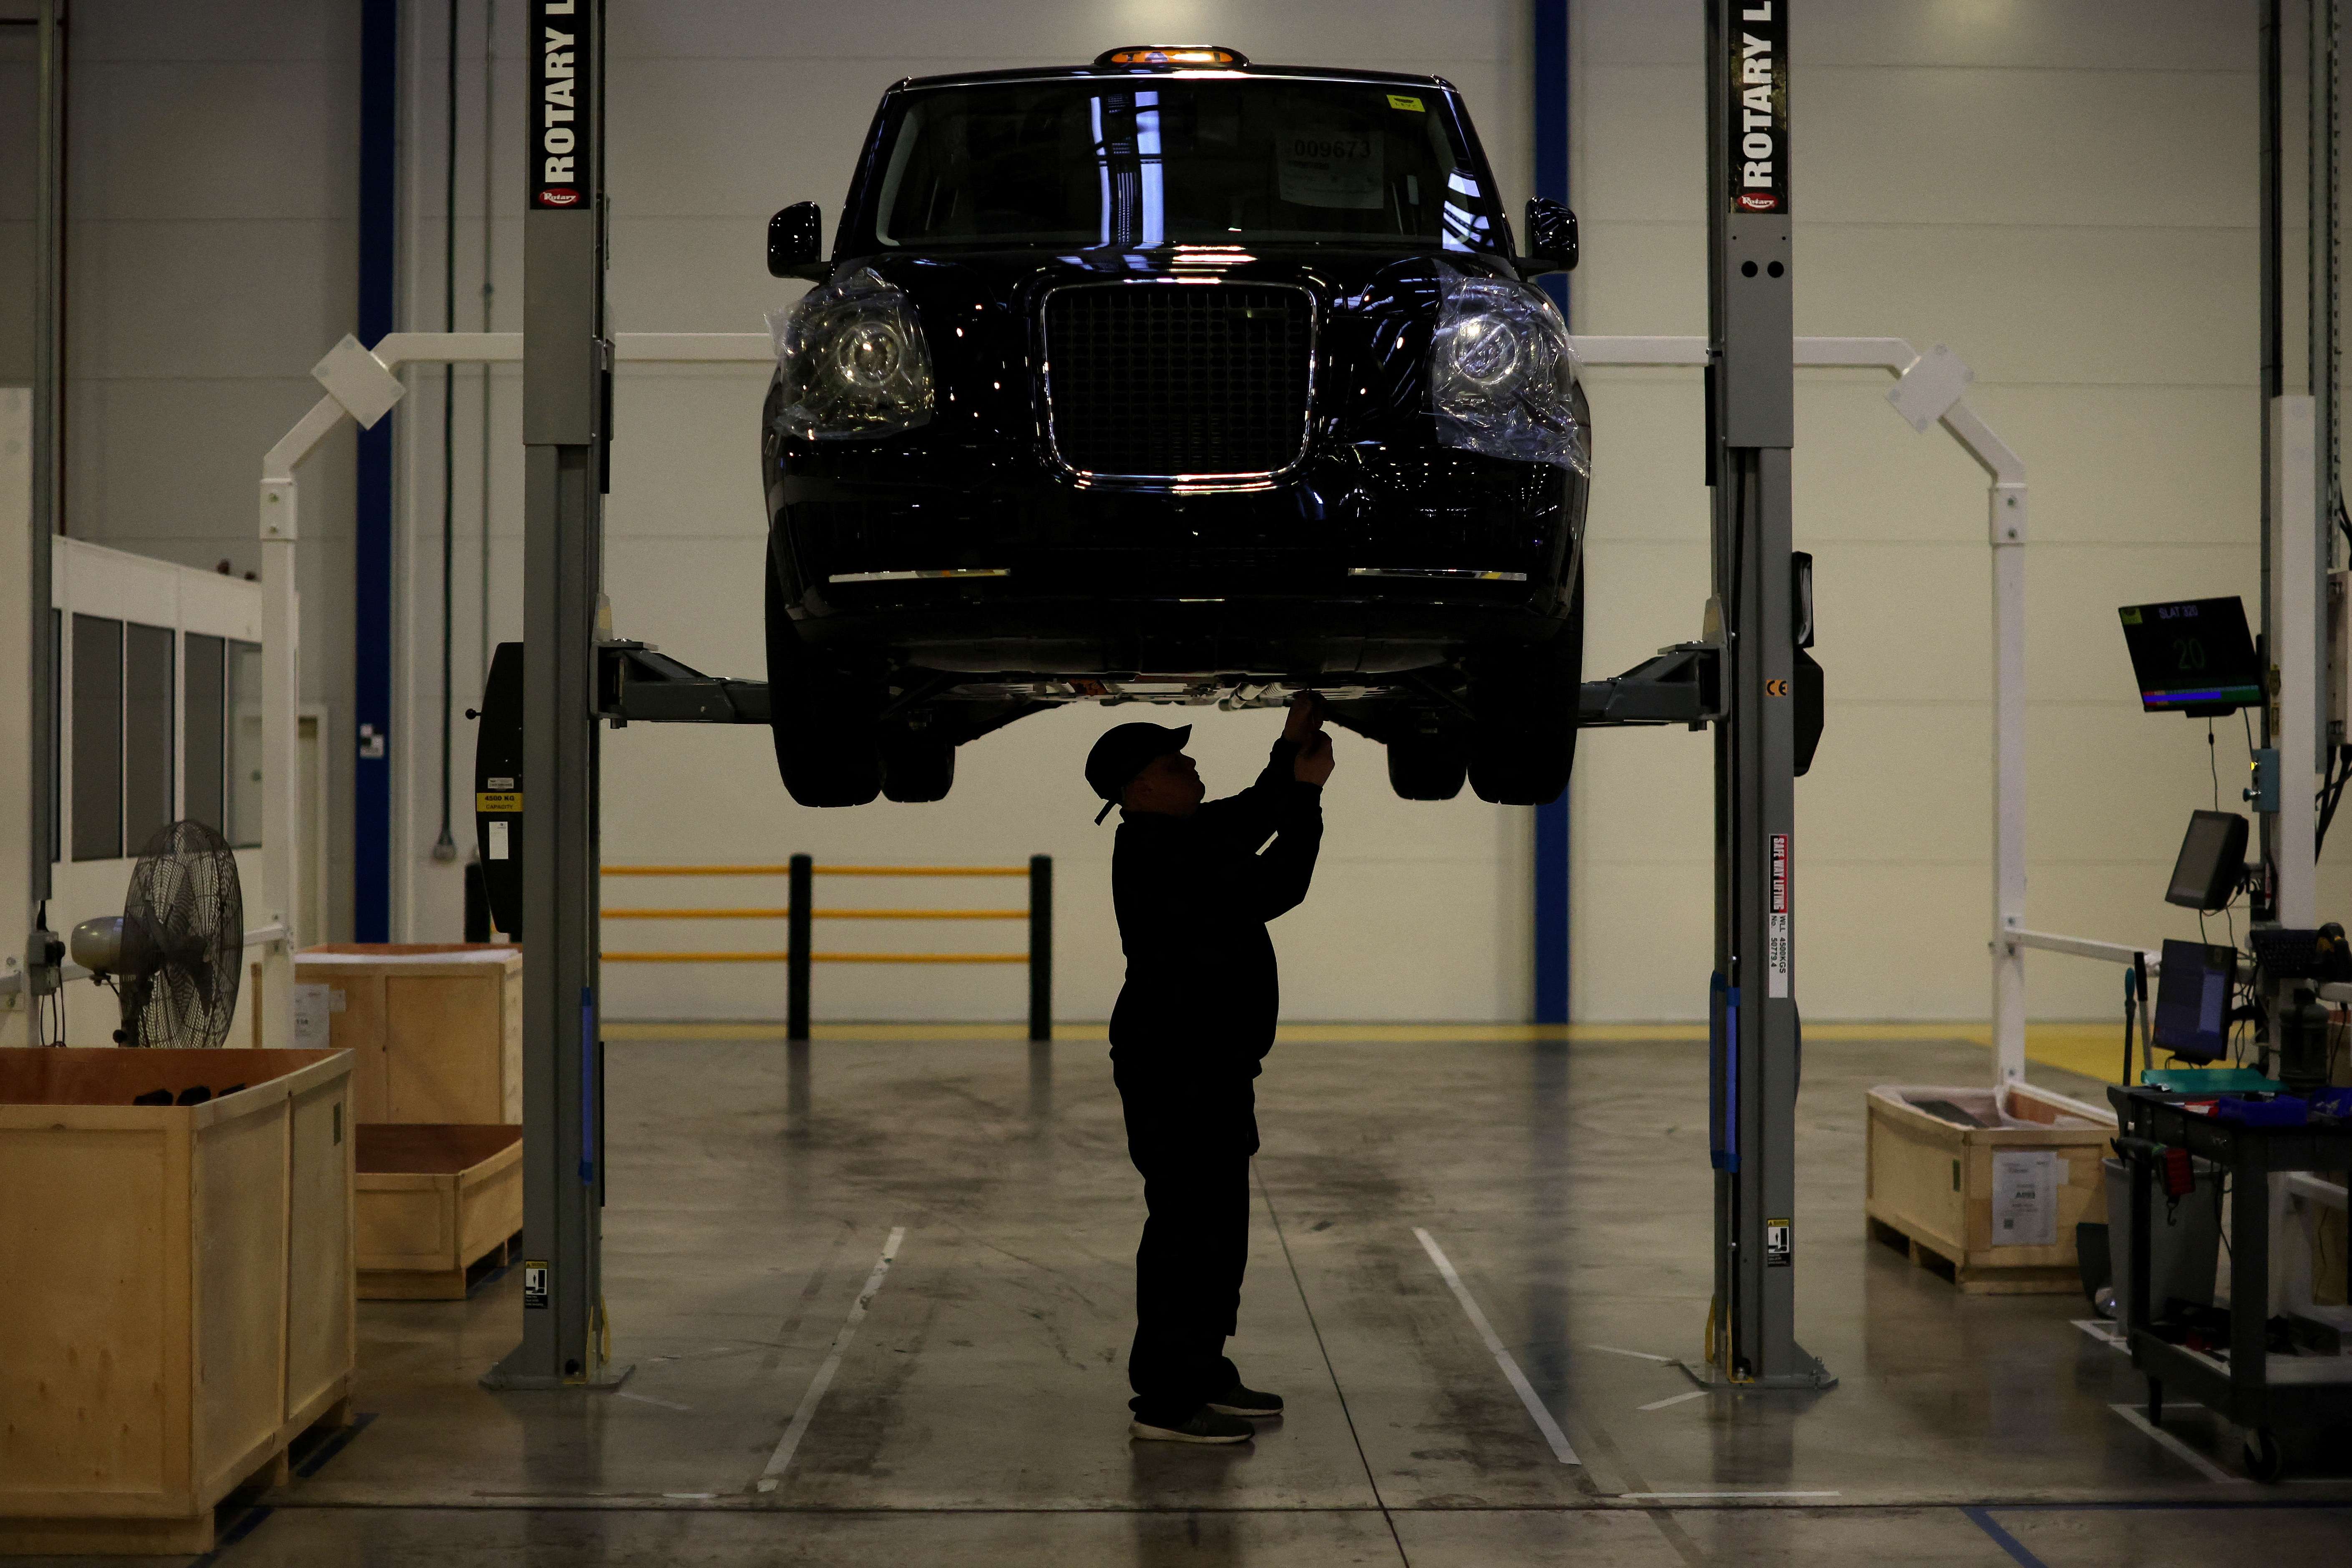 A worker stands under a TX electric taxi in the LEVC (London Electric Vehicle Company) factory in Coventry